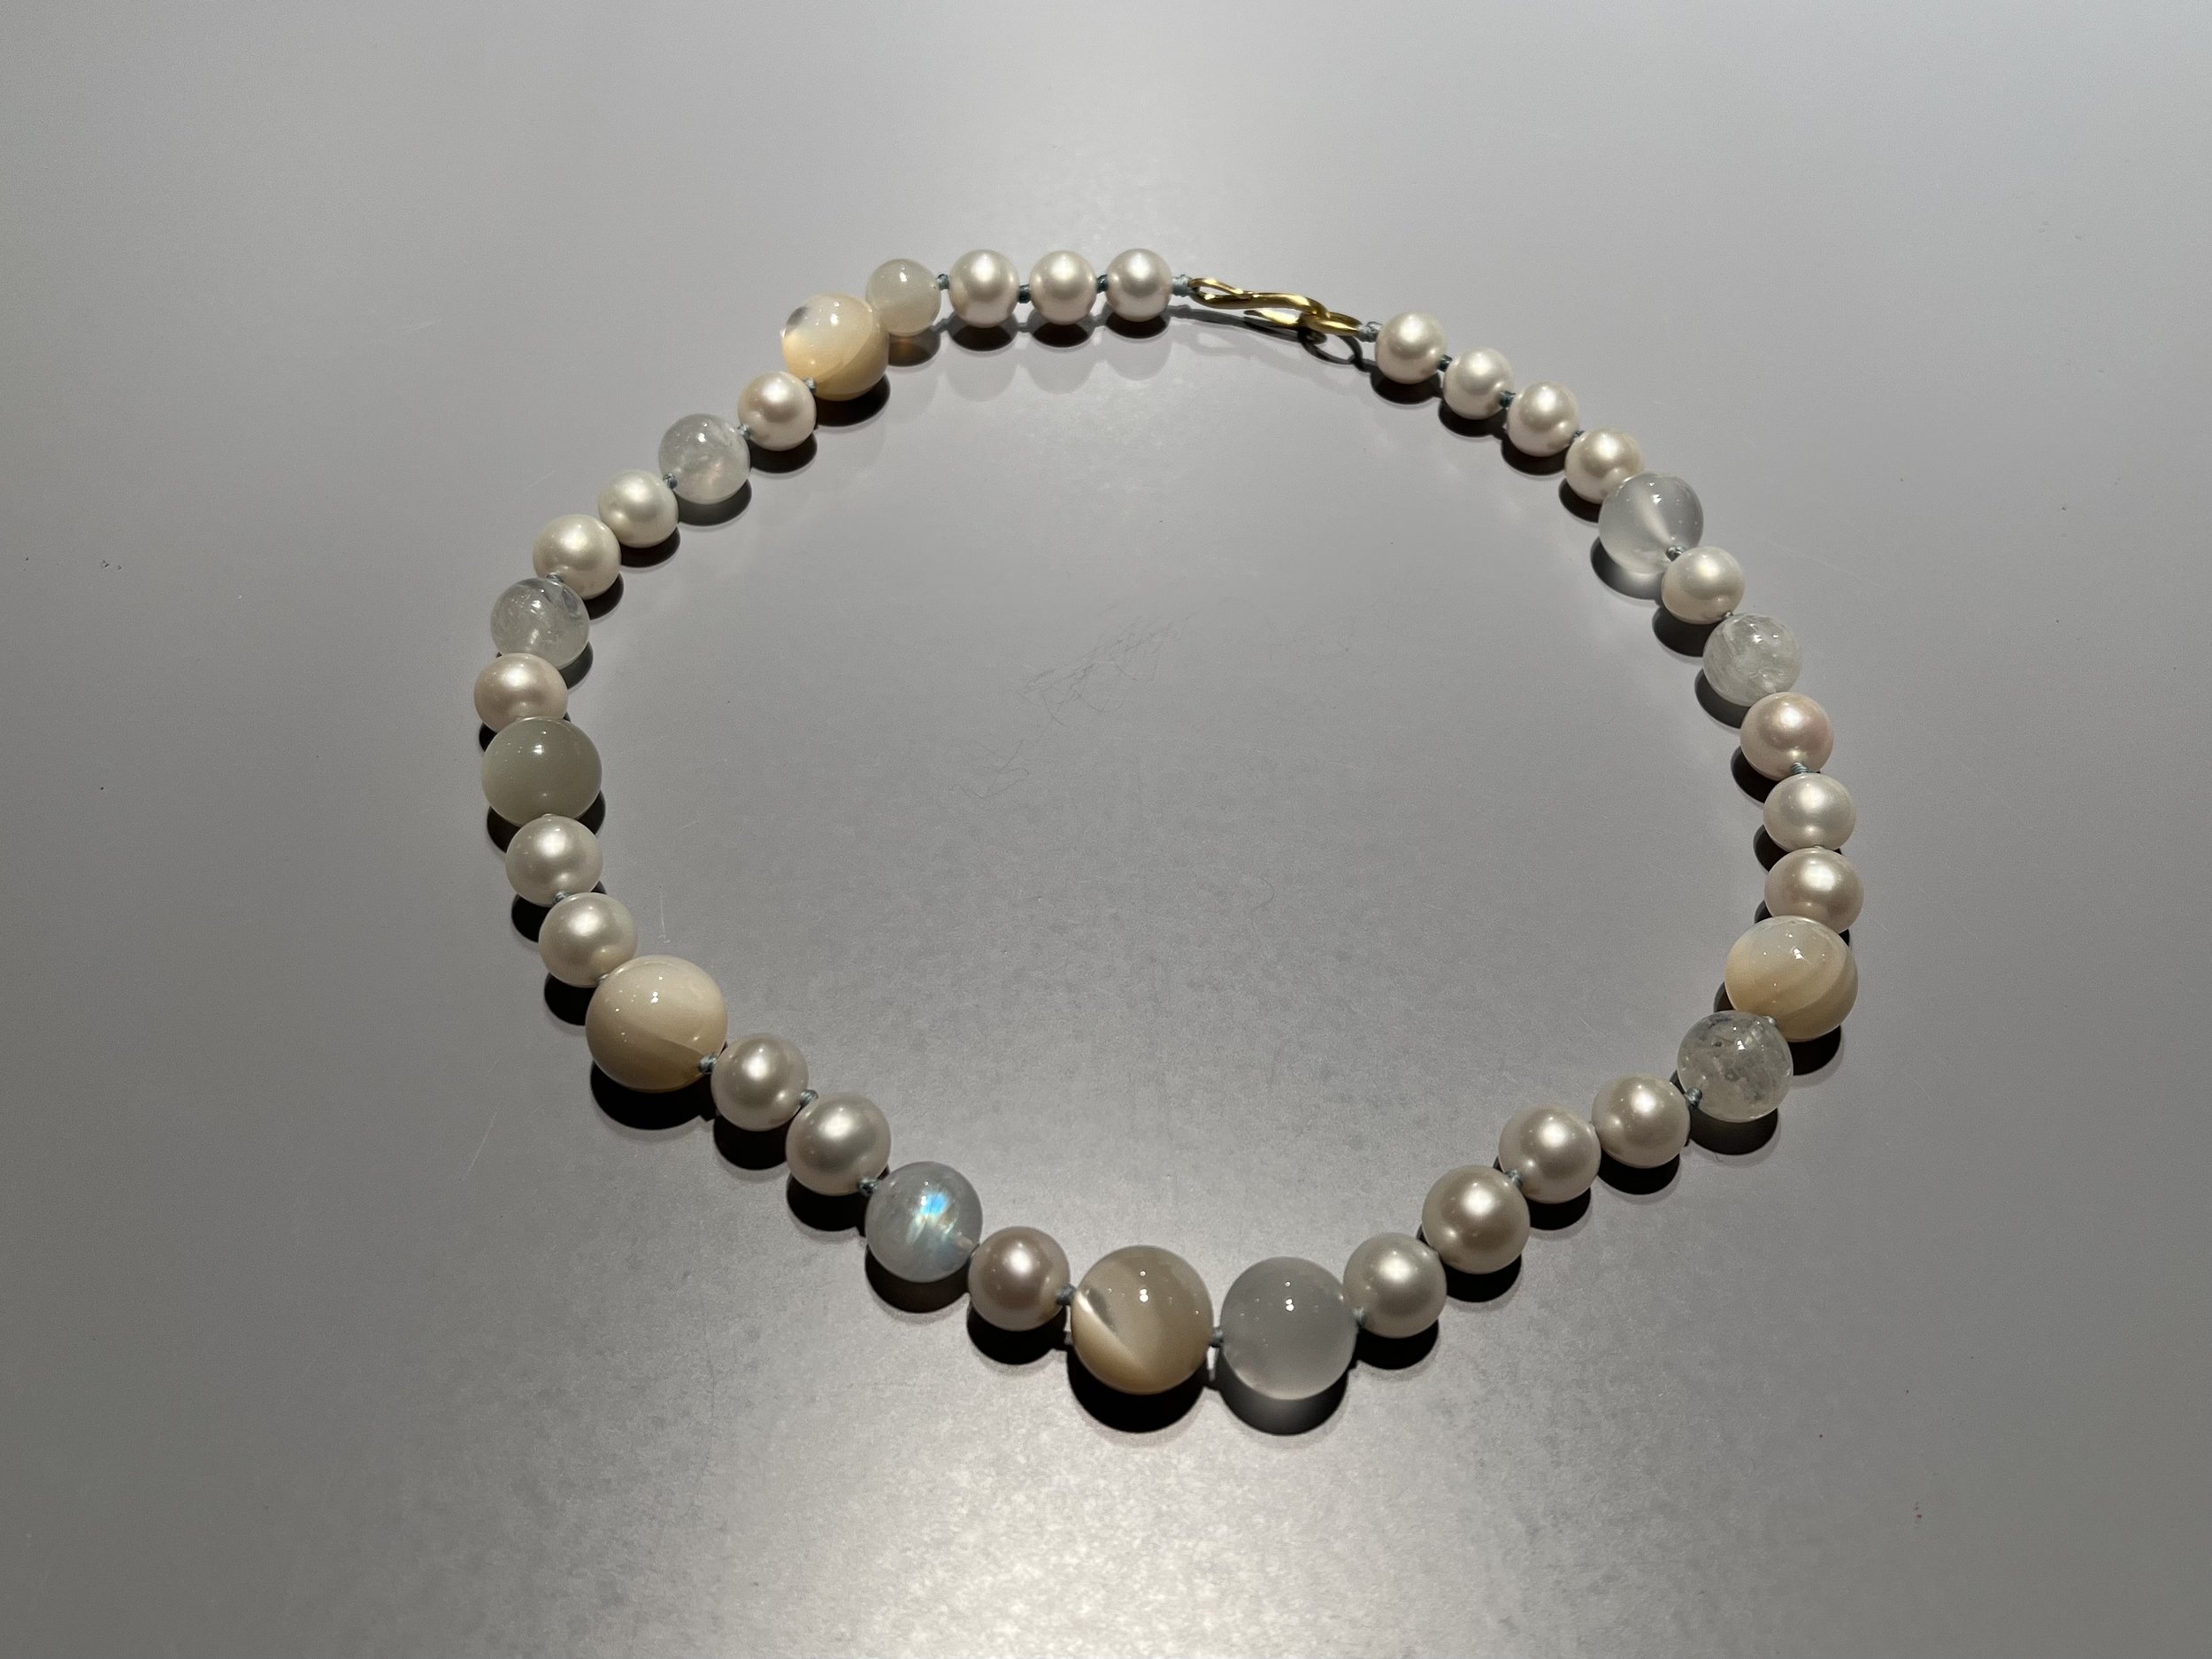 2 Way Laurel Mother of Pearl Necklace – Gifting Brands